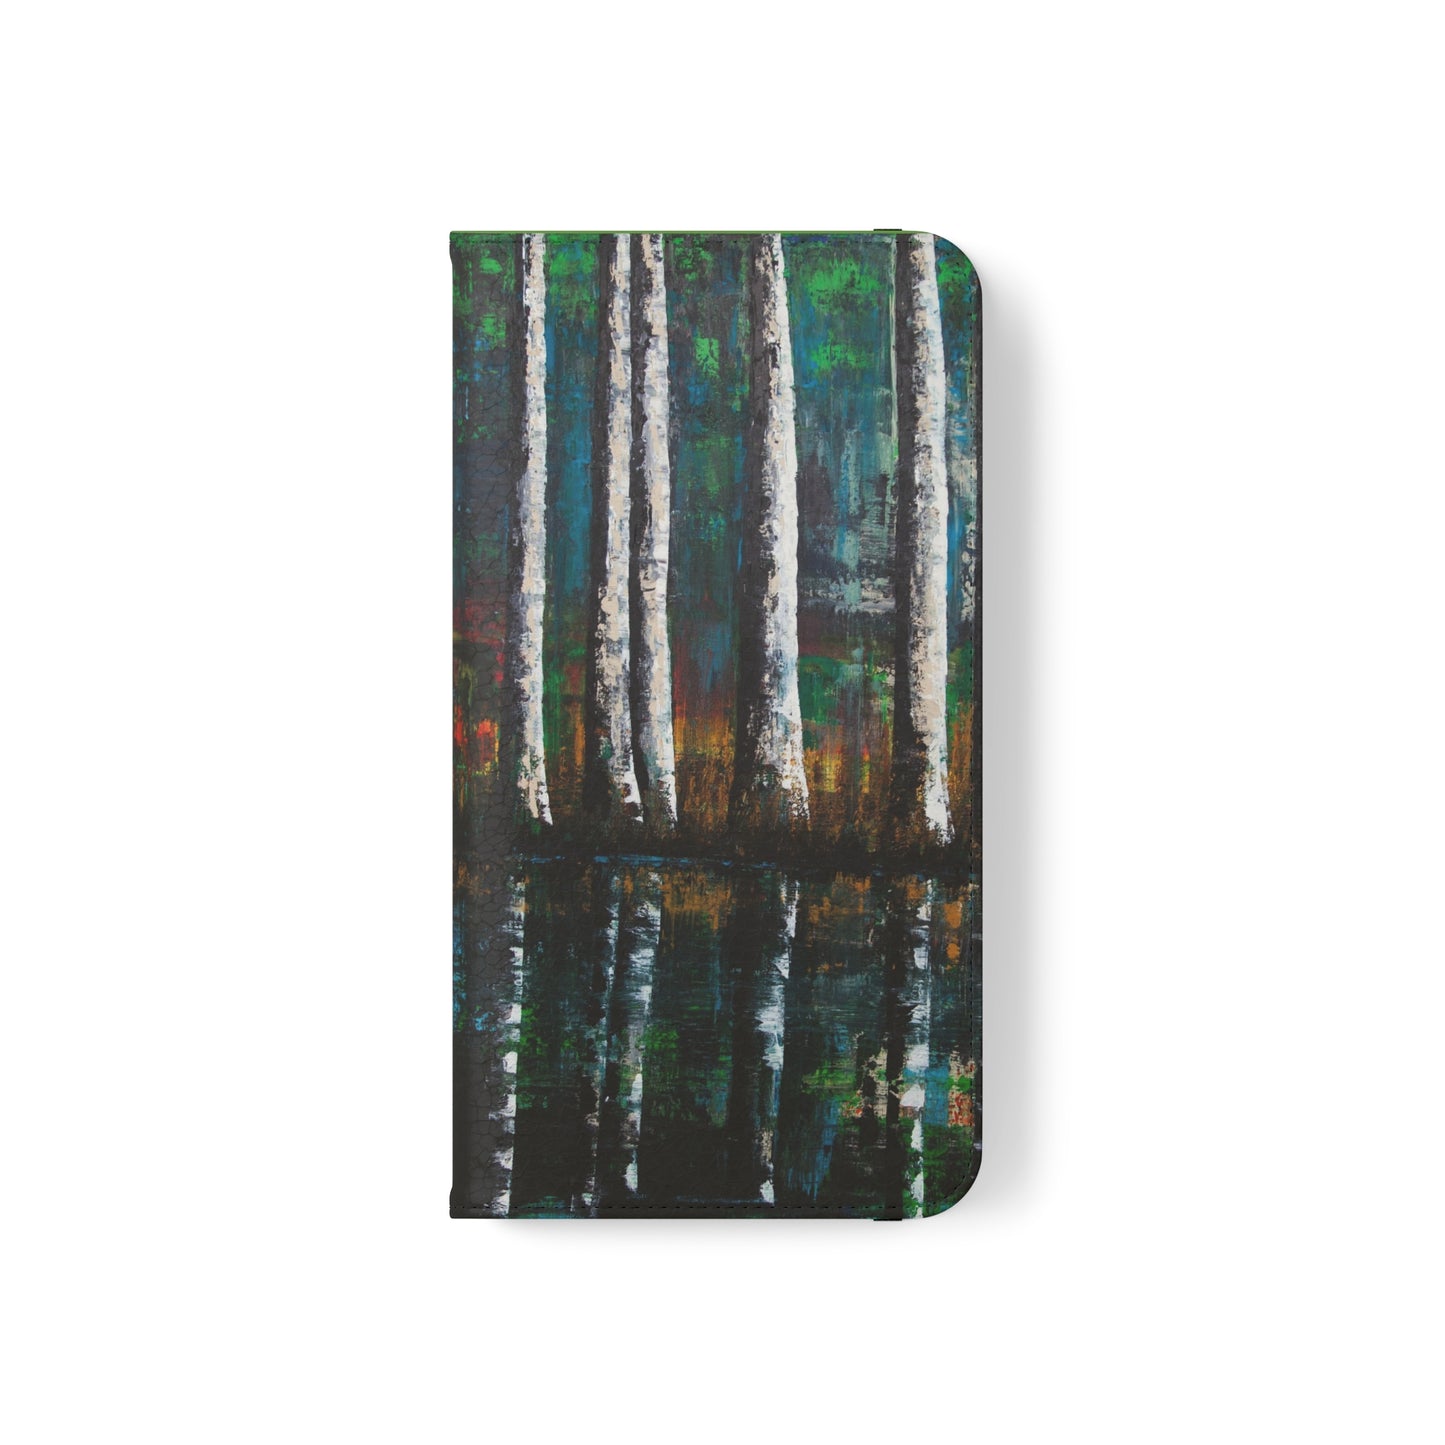 Phone Flip Cases - Wallet Phone Case - Reflections with Poem